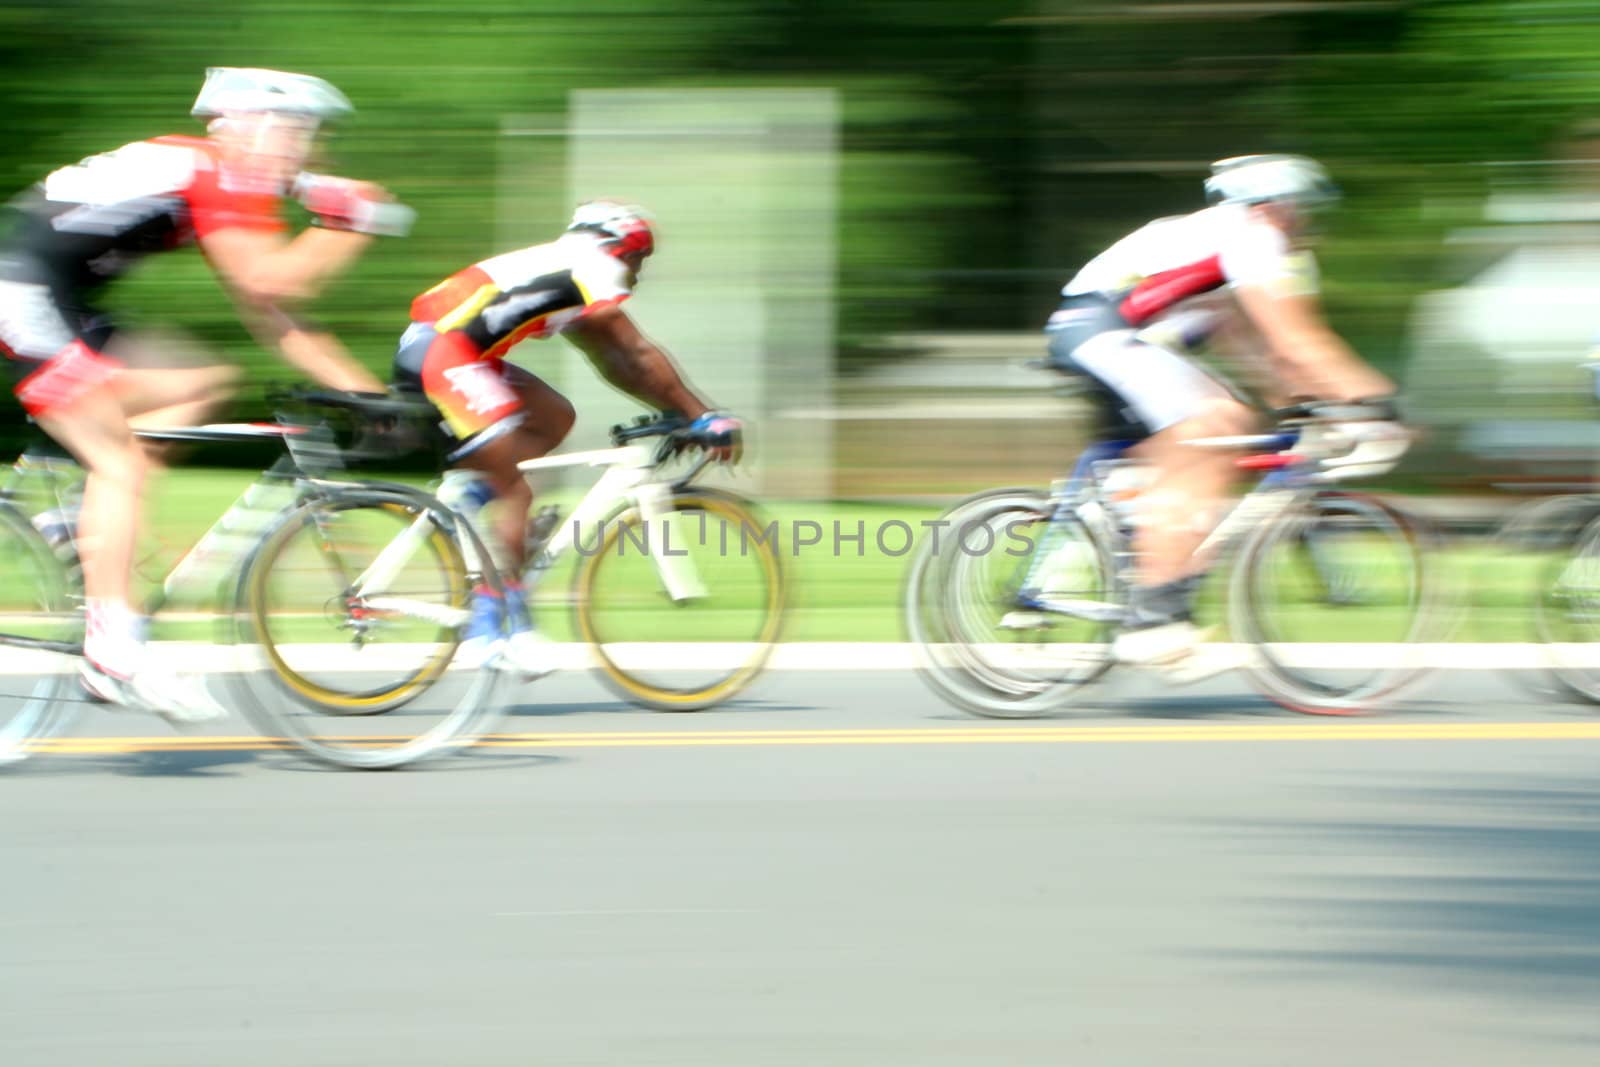 A Blurred motion bicycle race by njnightsky